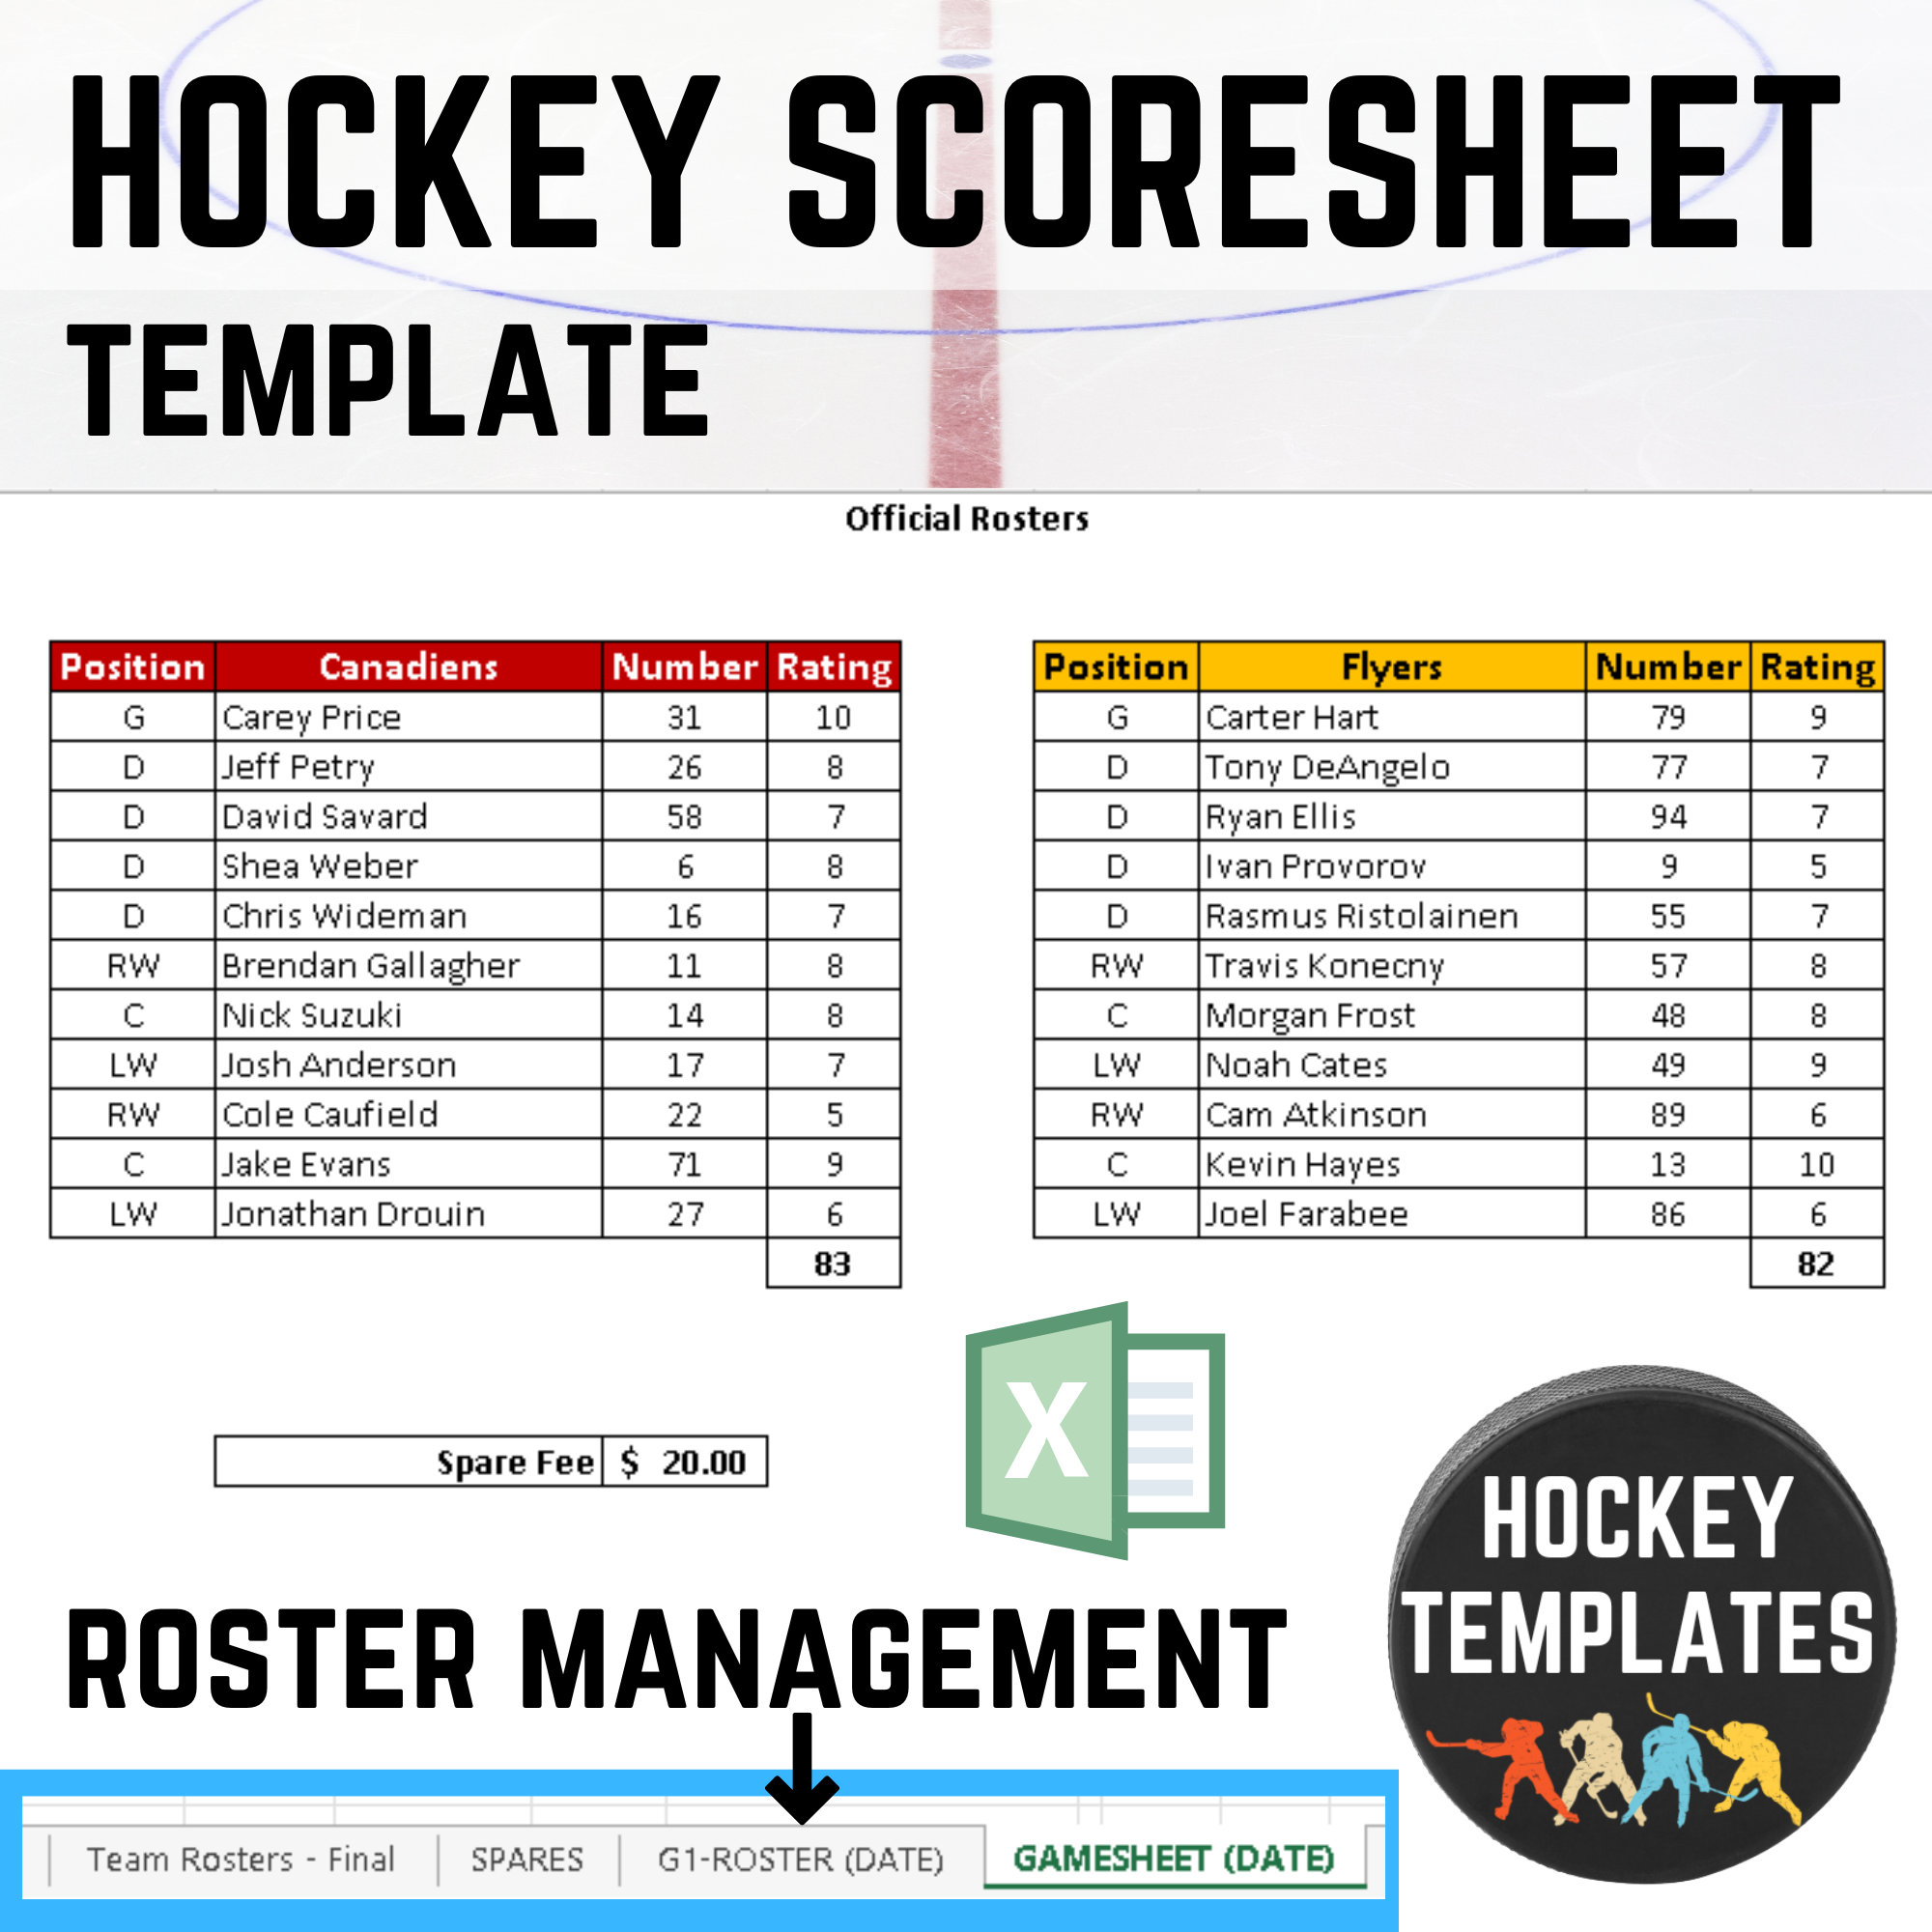 hockey-score-sheet-template-team-roster-player-management-etsy